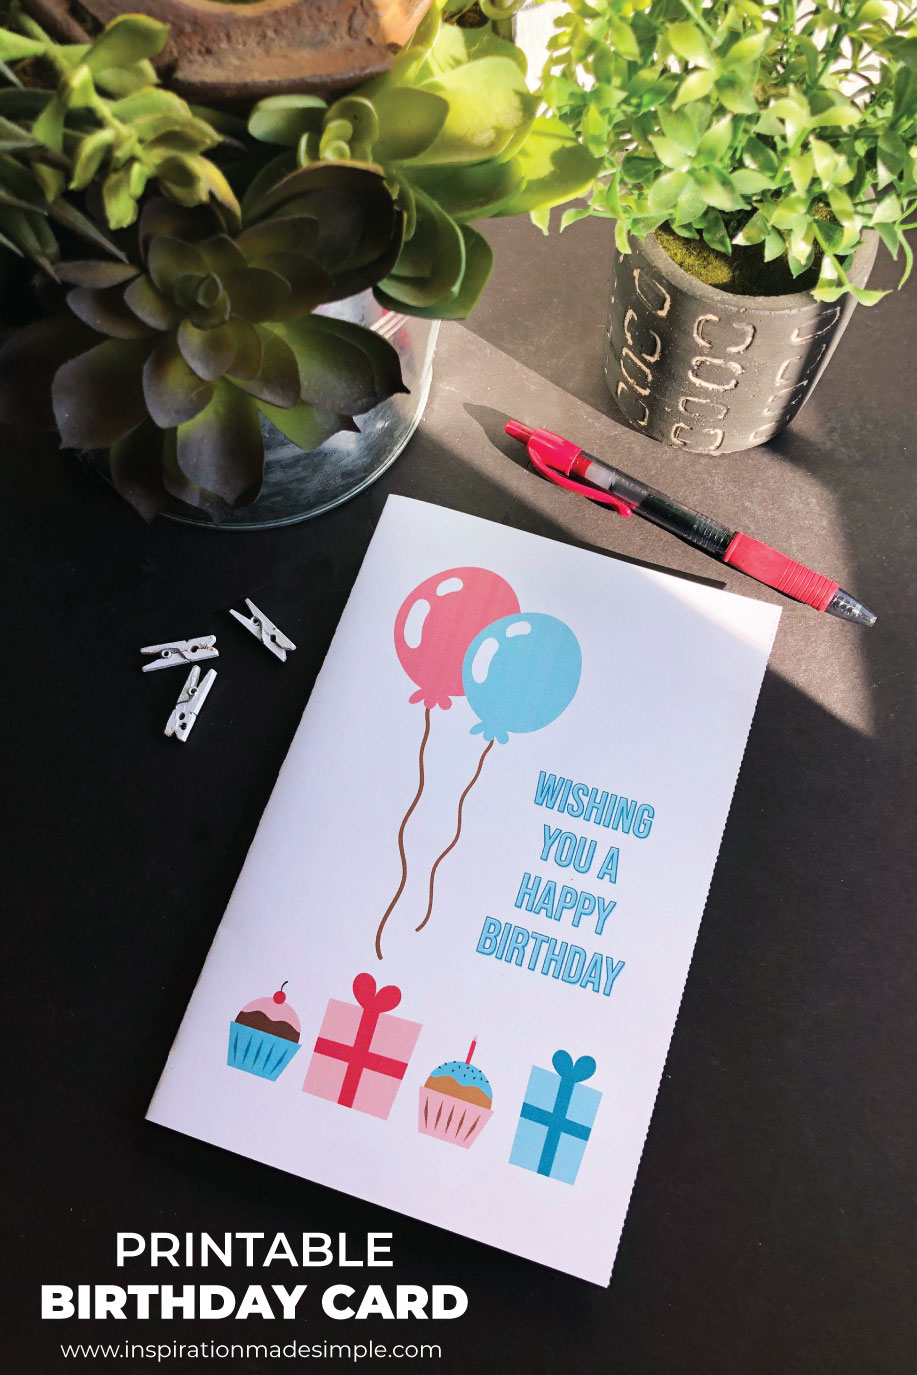 Printable Birthday Card that holds an origami money heart